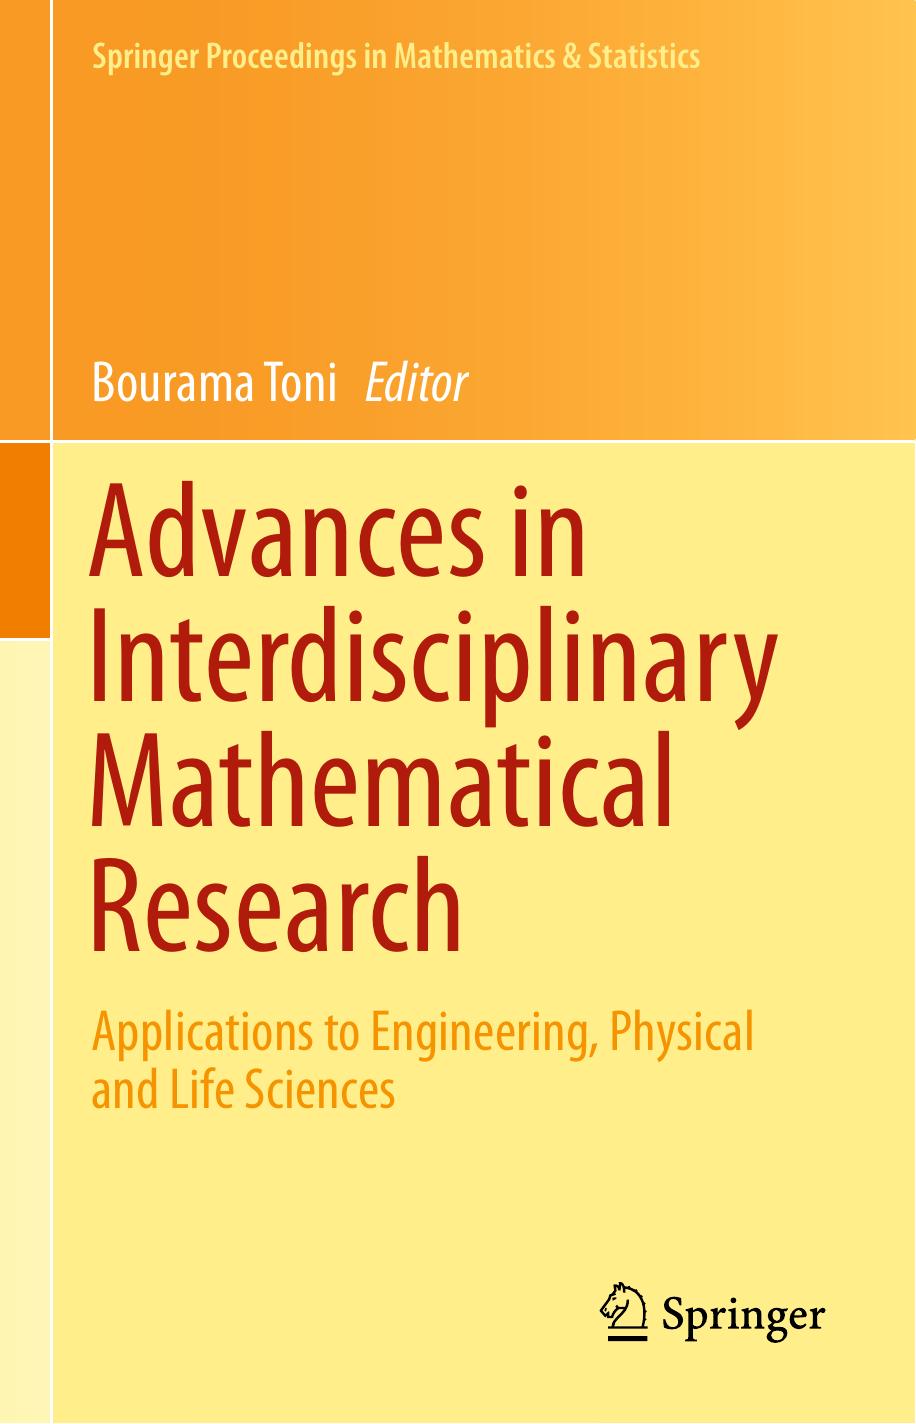 Advances in Interdisciplinary Mathematical Research: Applications to Engineering, Physical and Life Sciences by Bourama Toni